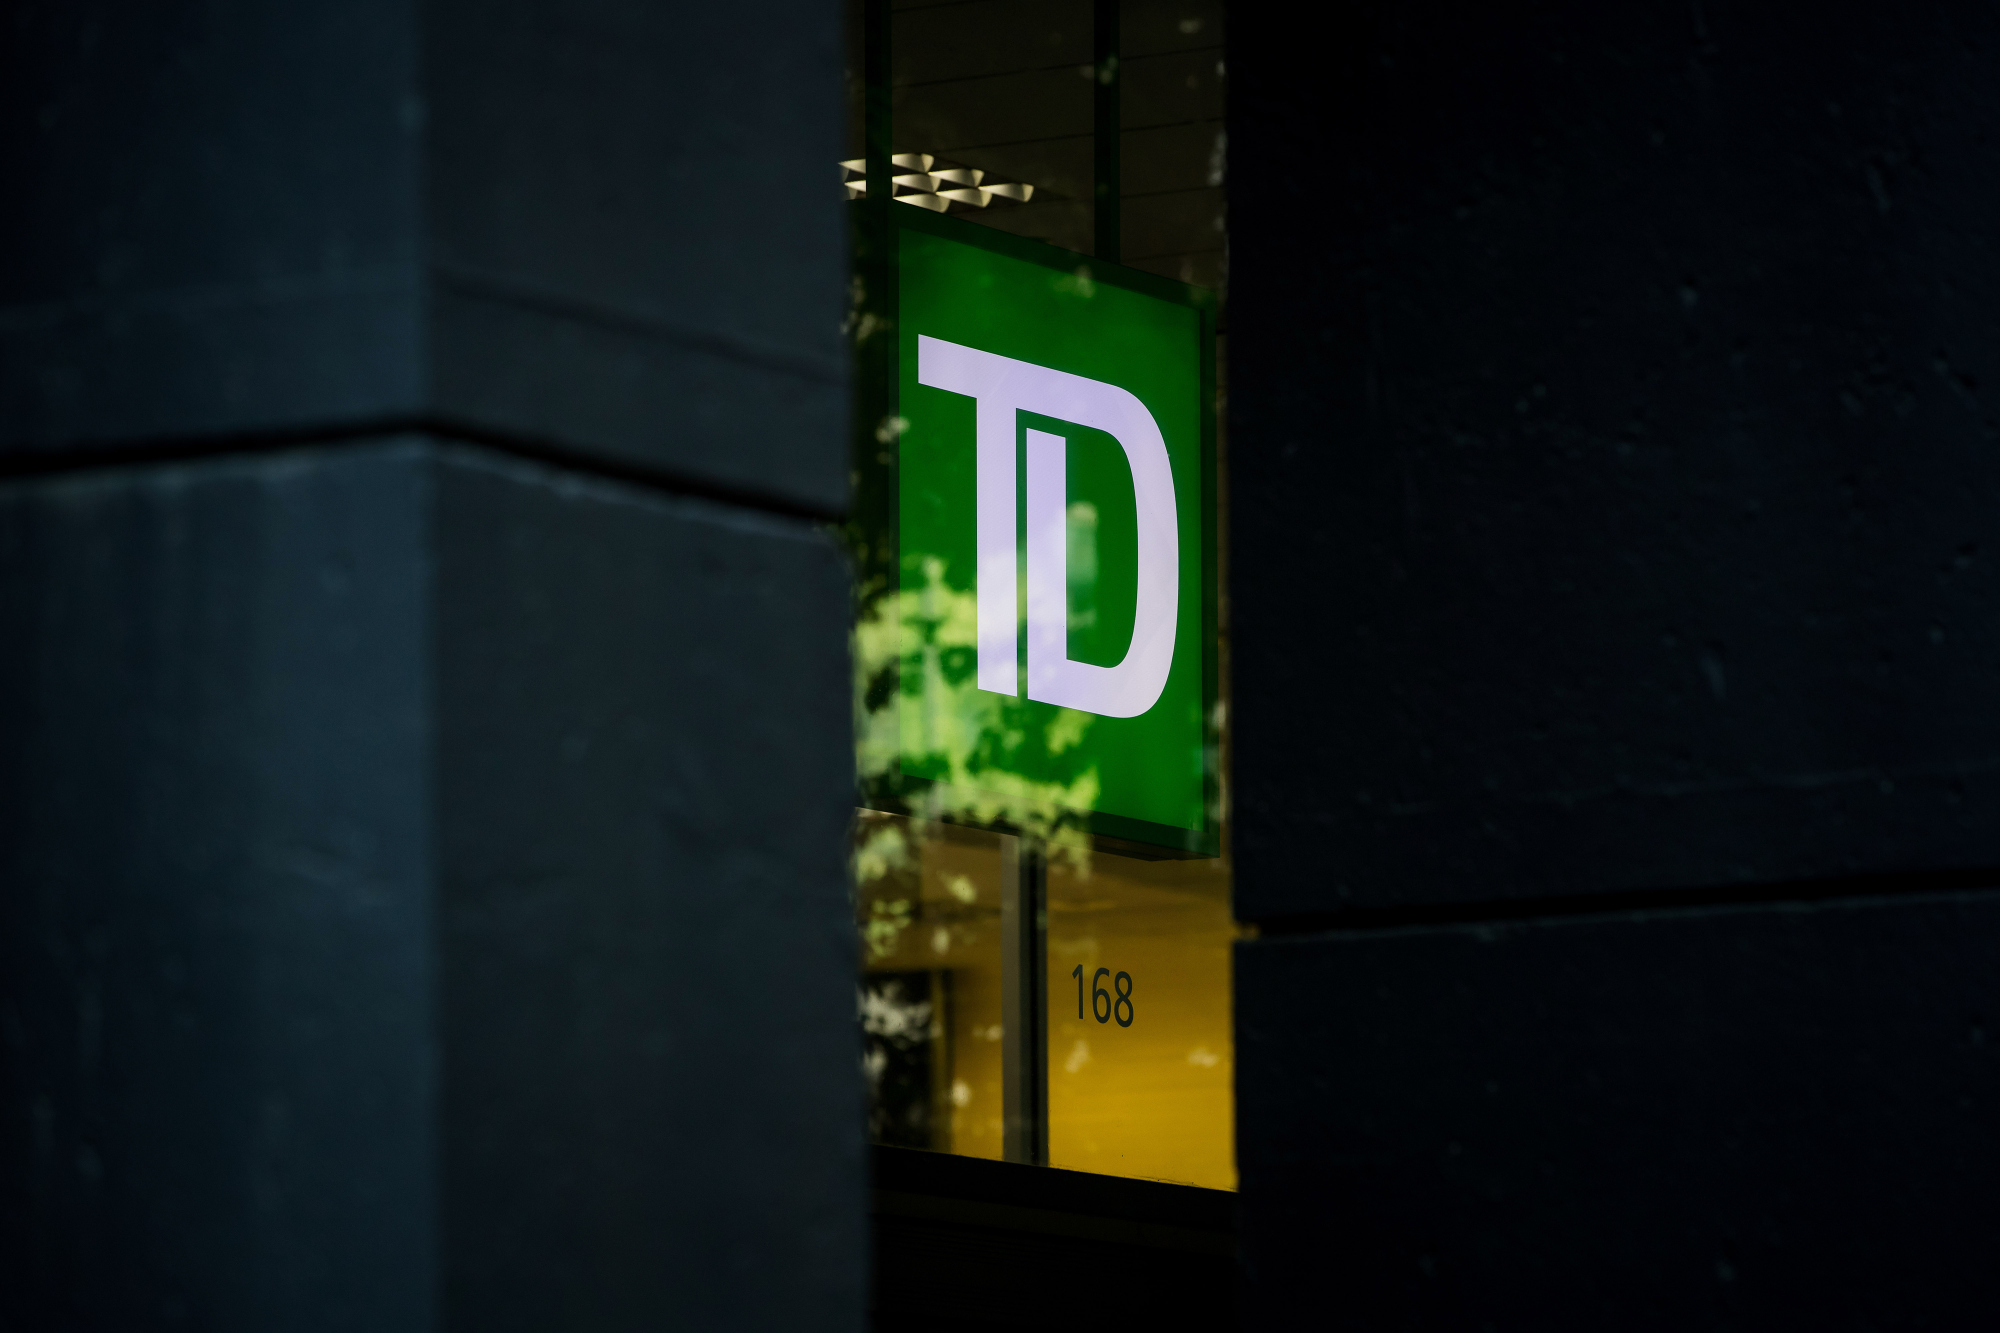 A Toronto-Dominion Canada Trust bank branch in Vancouver.